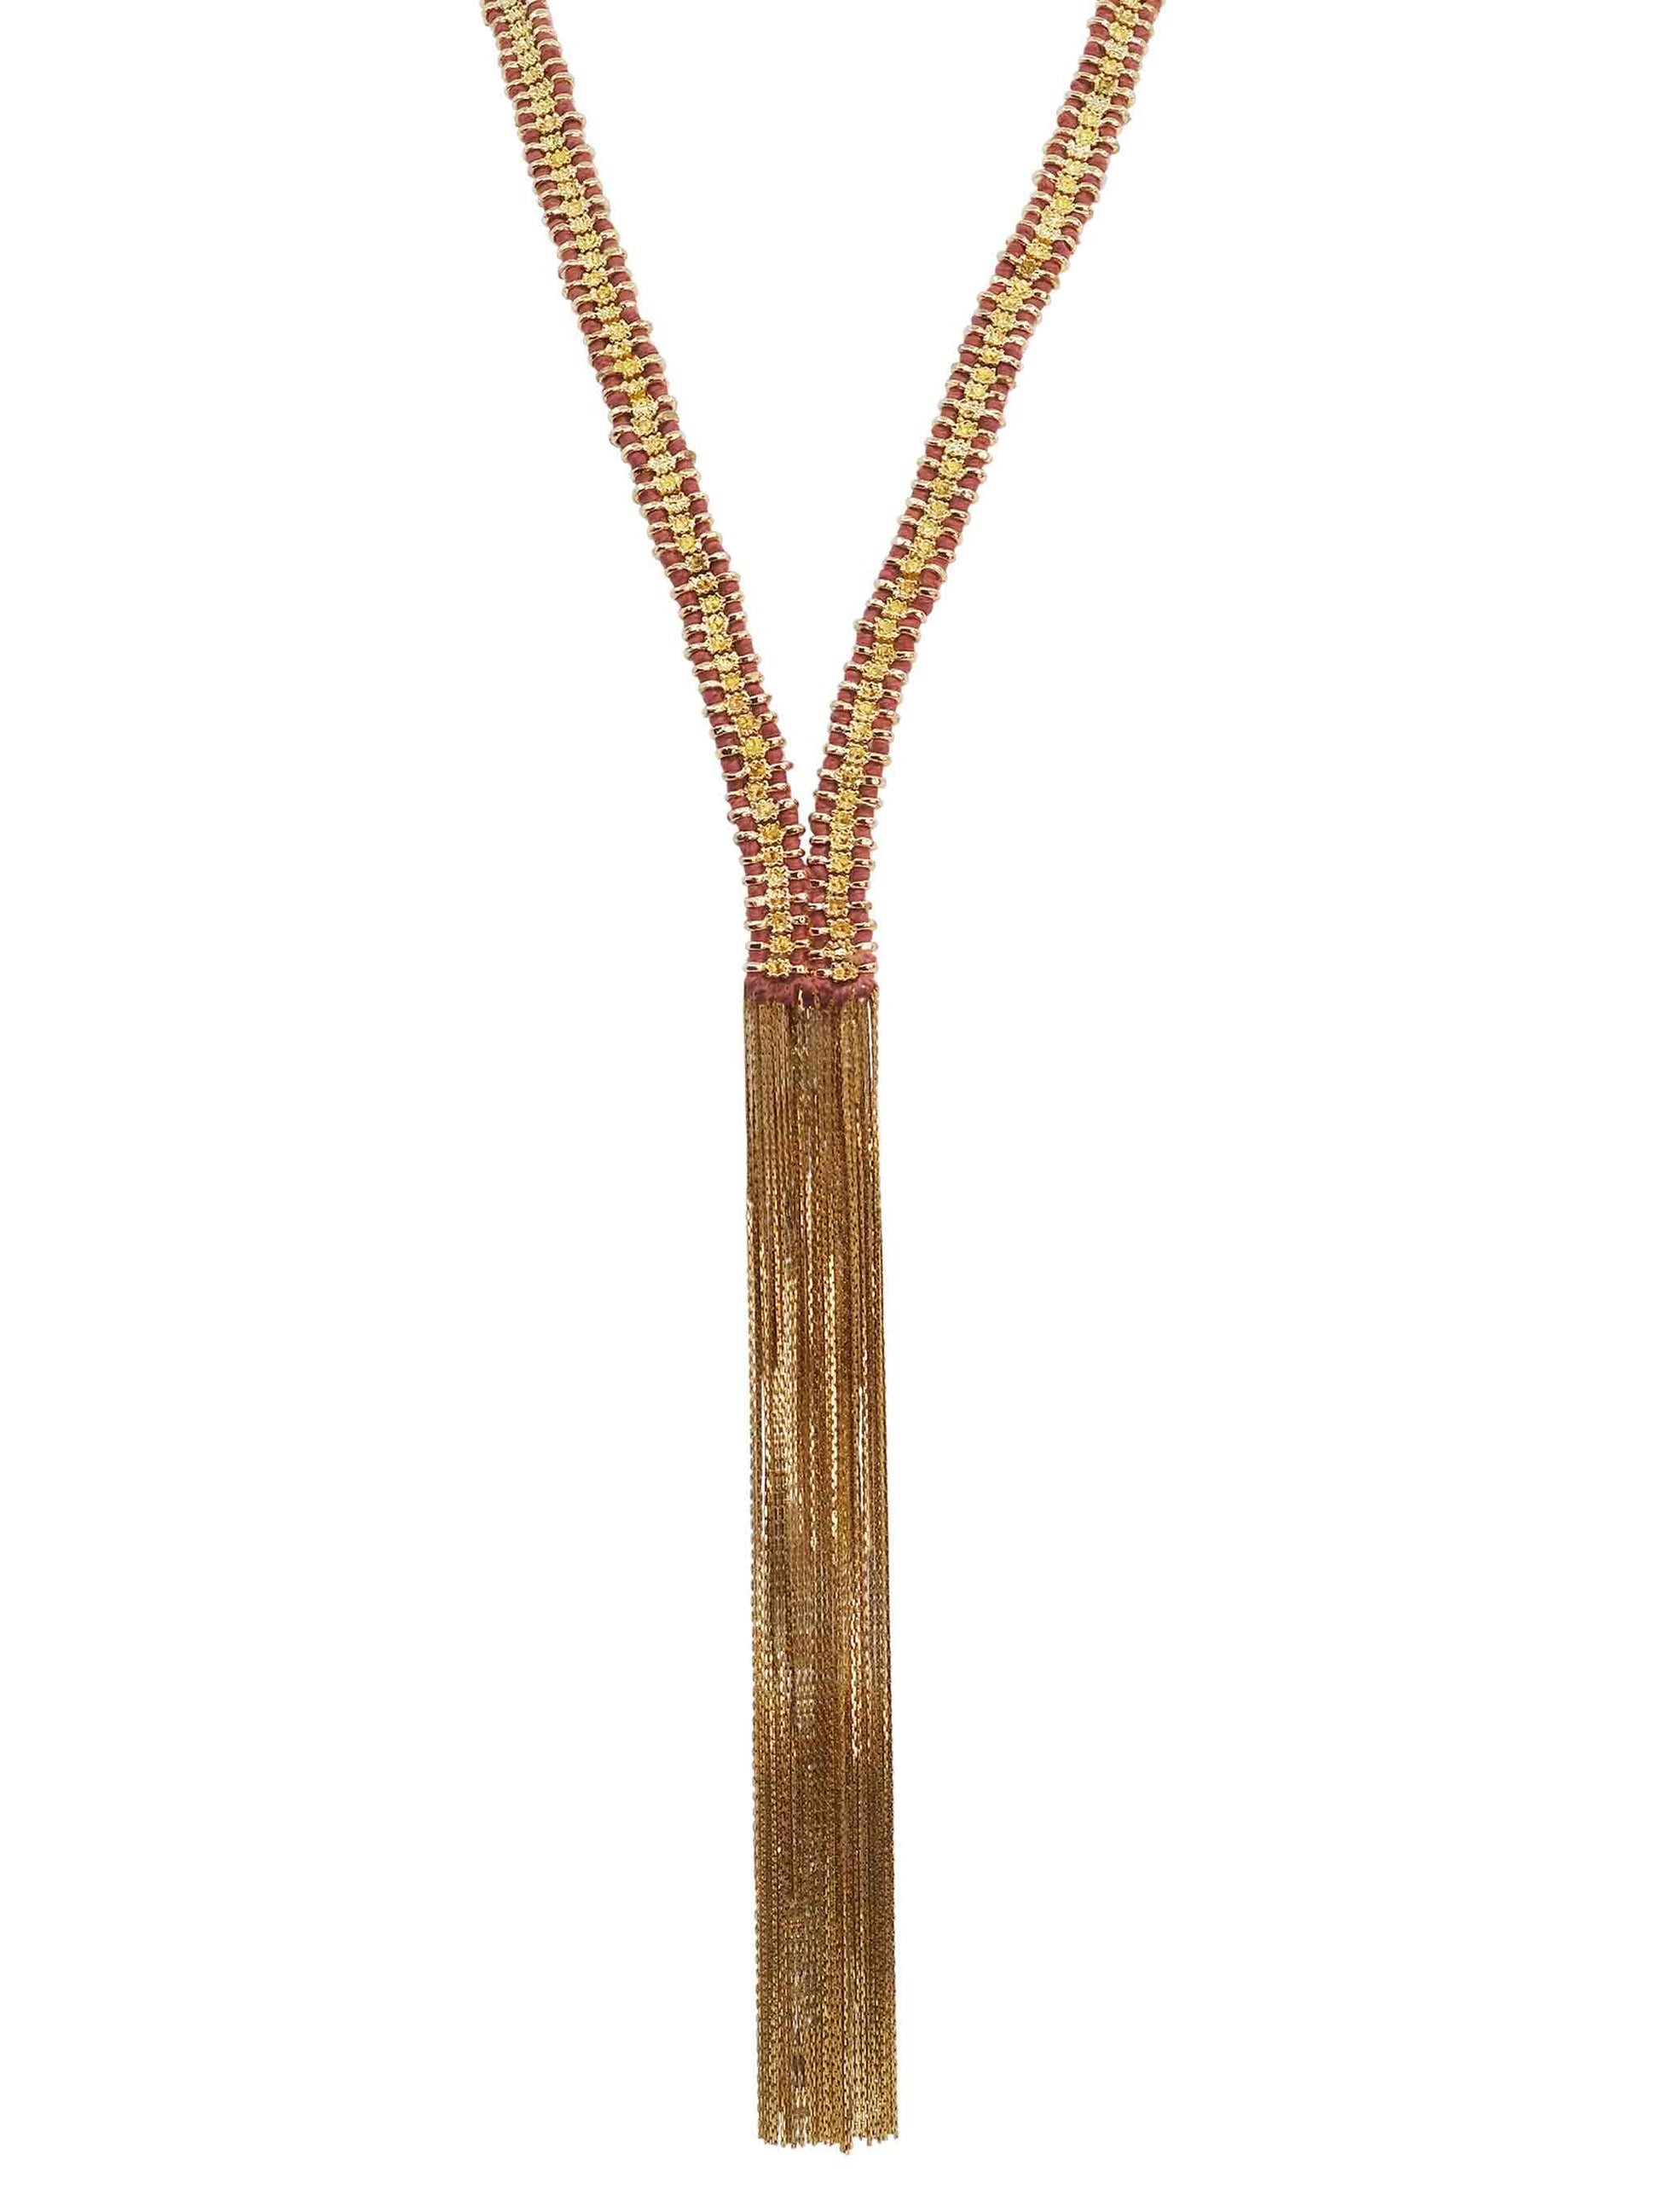 Long Accessory Gold and Terracotta Tone Vermeil Fringe Necklace